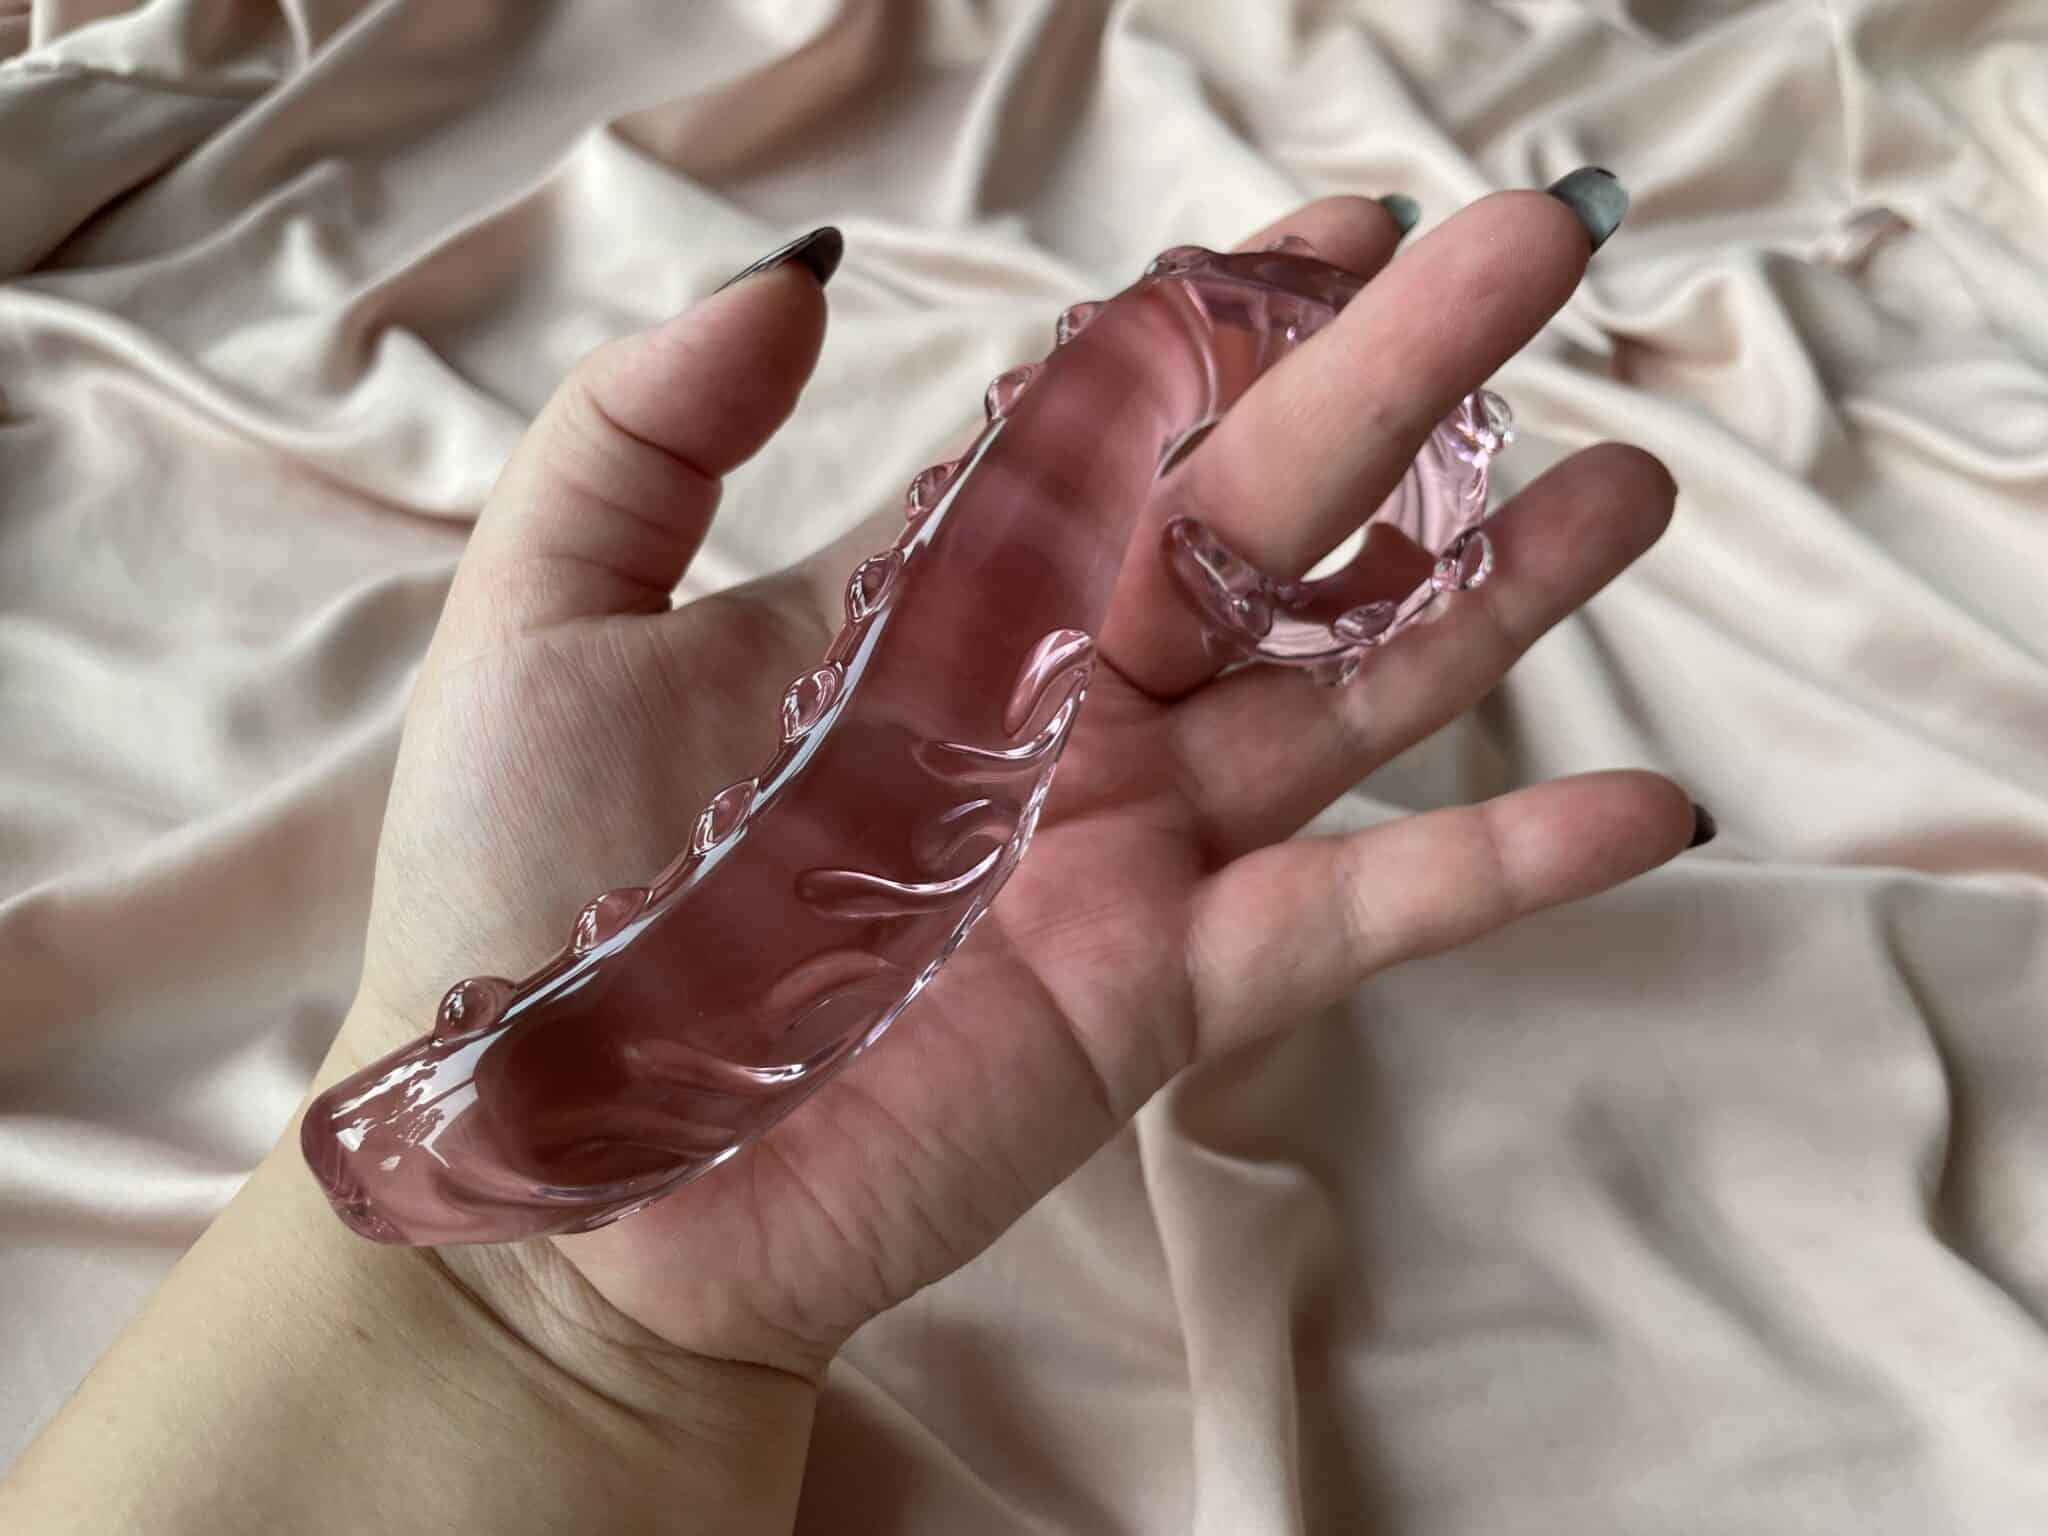 Icicles No. 24 Glass Tentacle Dildo How easy was it to use?